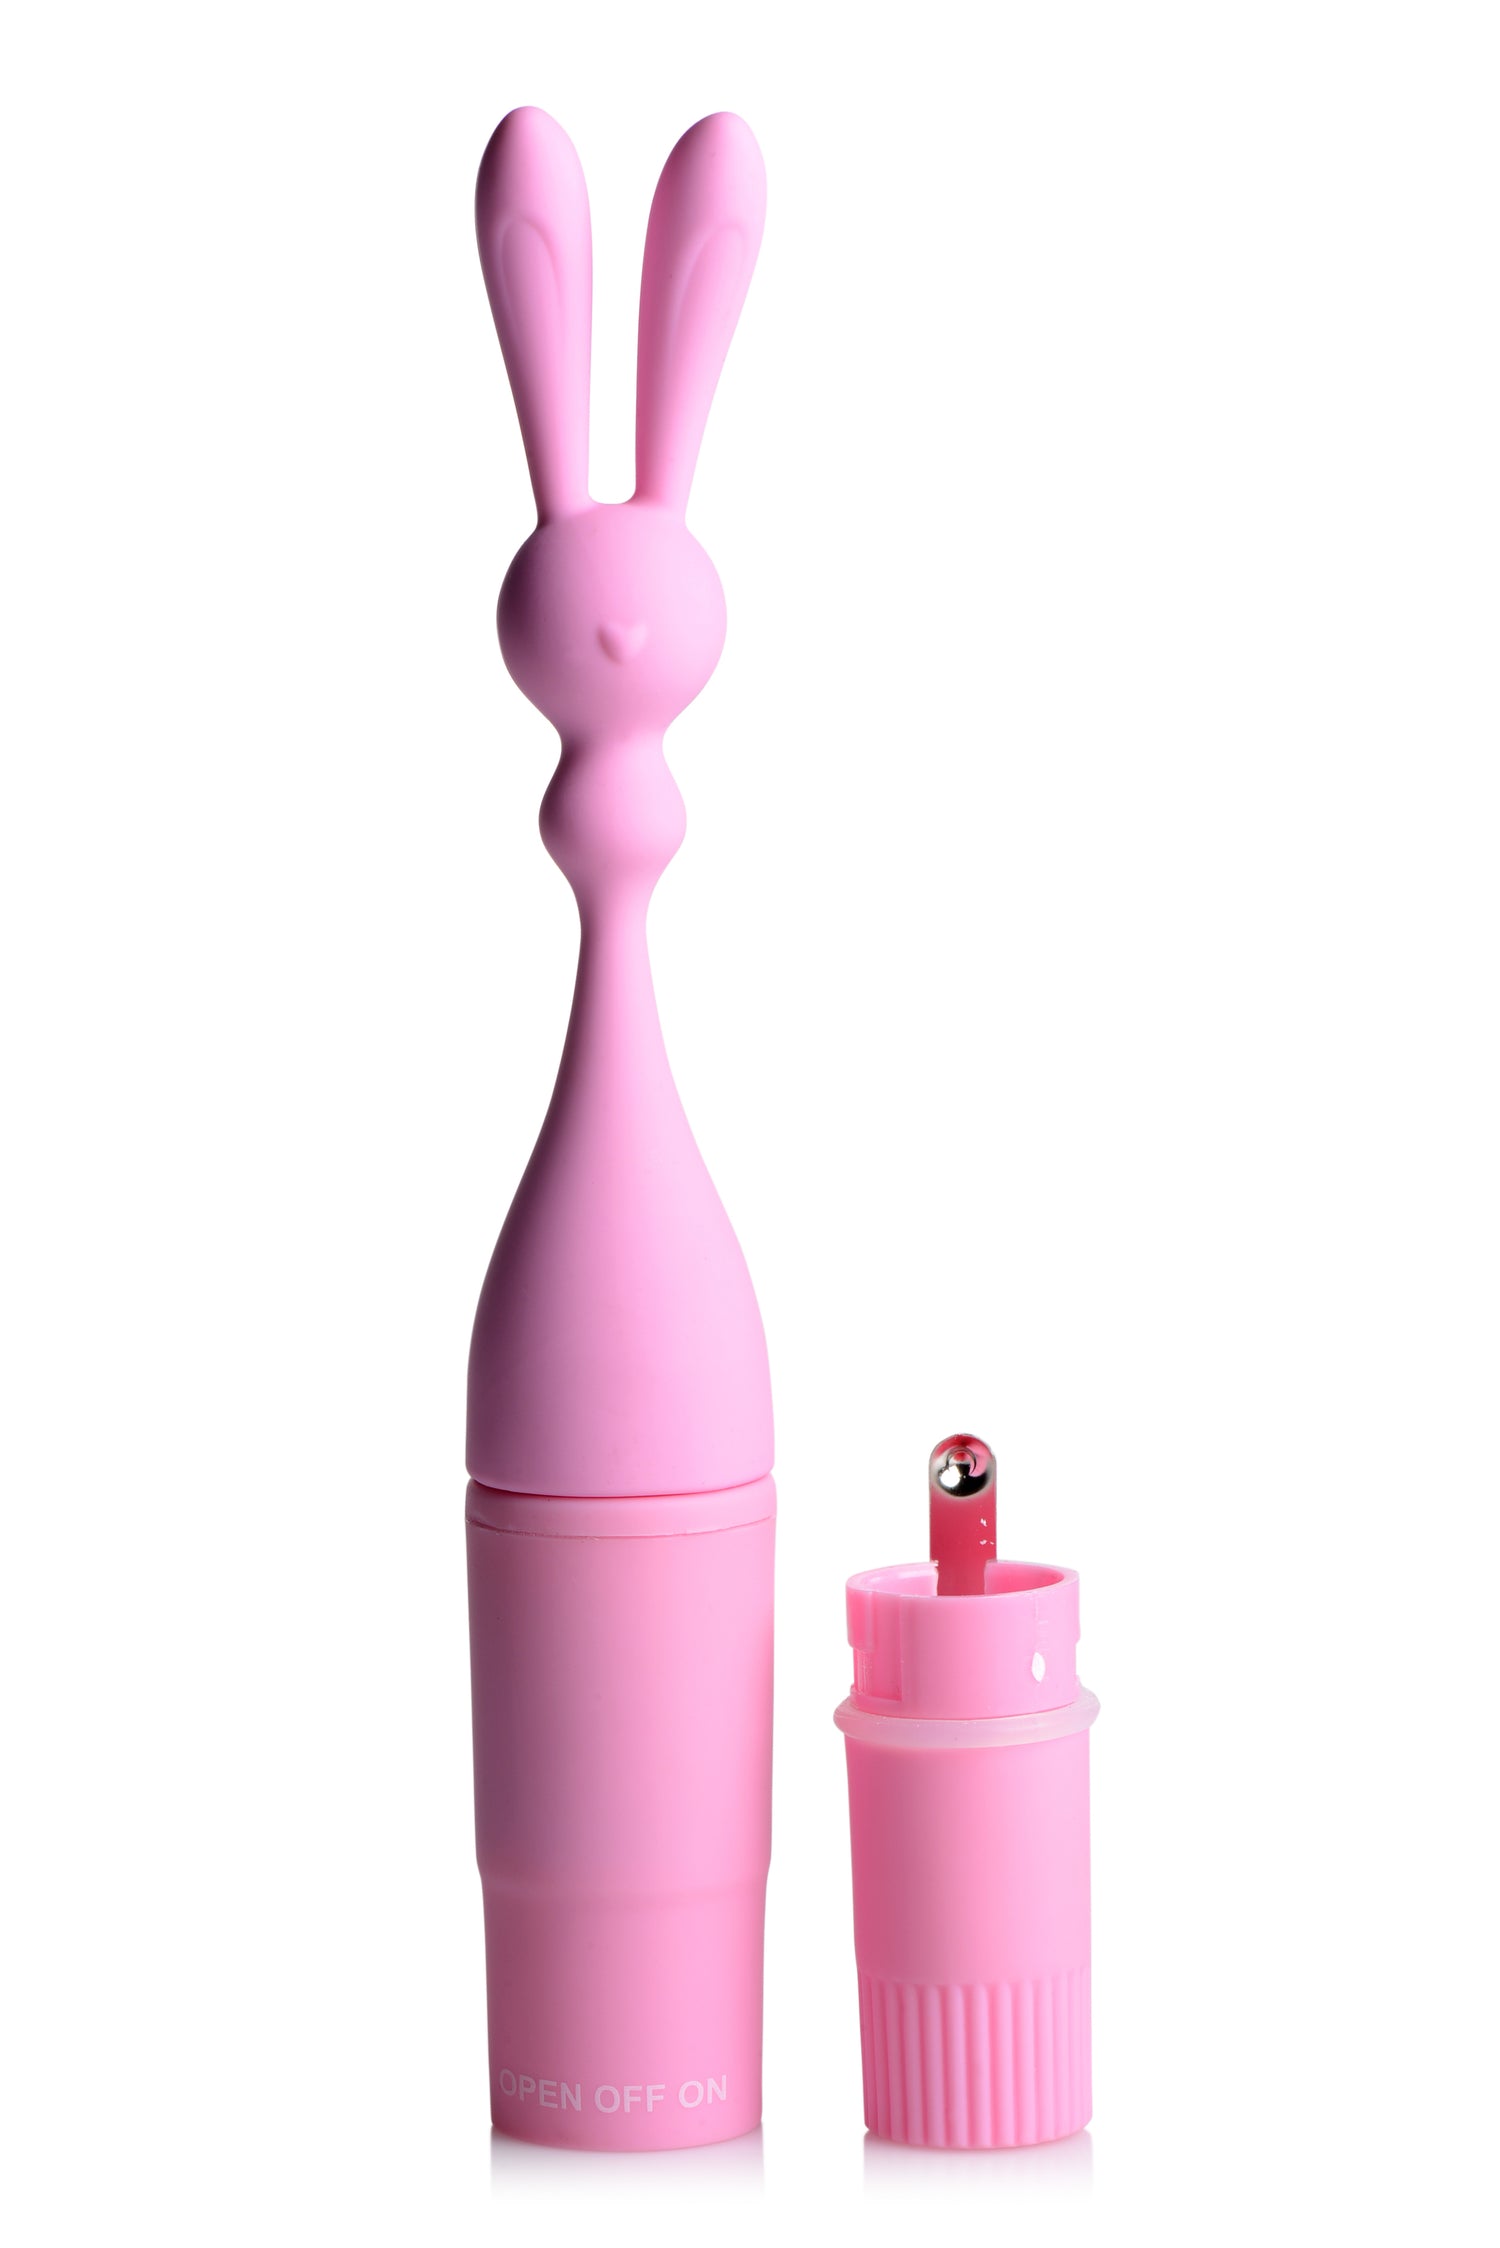 Bunny Rocket Silicone Vibrator - Just for you desires